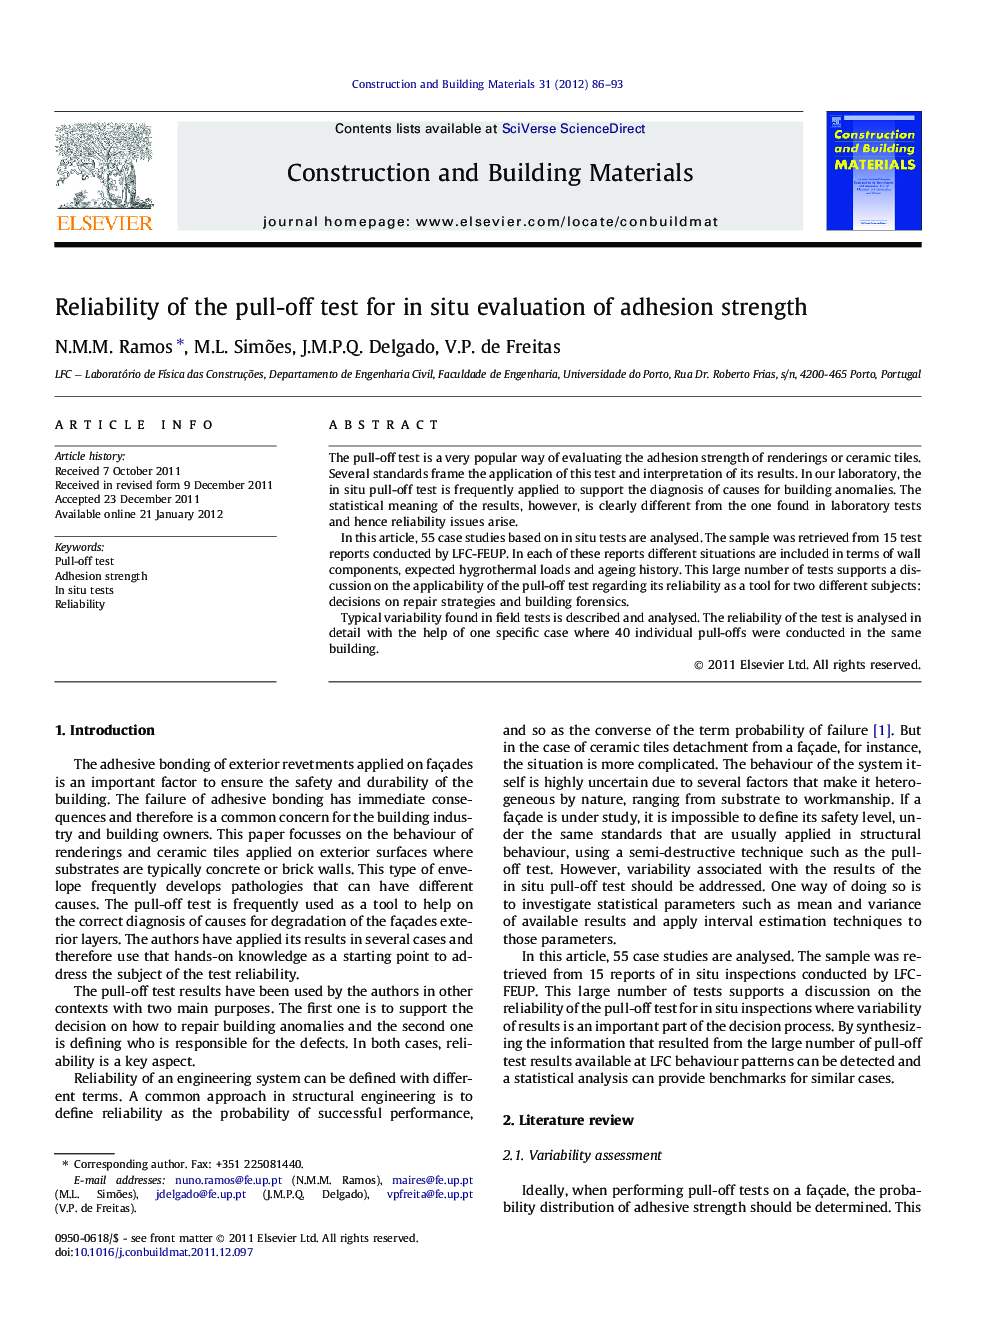 Reliability of the pull-off test for in situ evaluation of adhesion strength